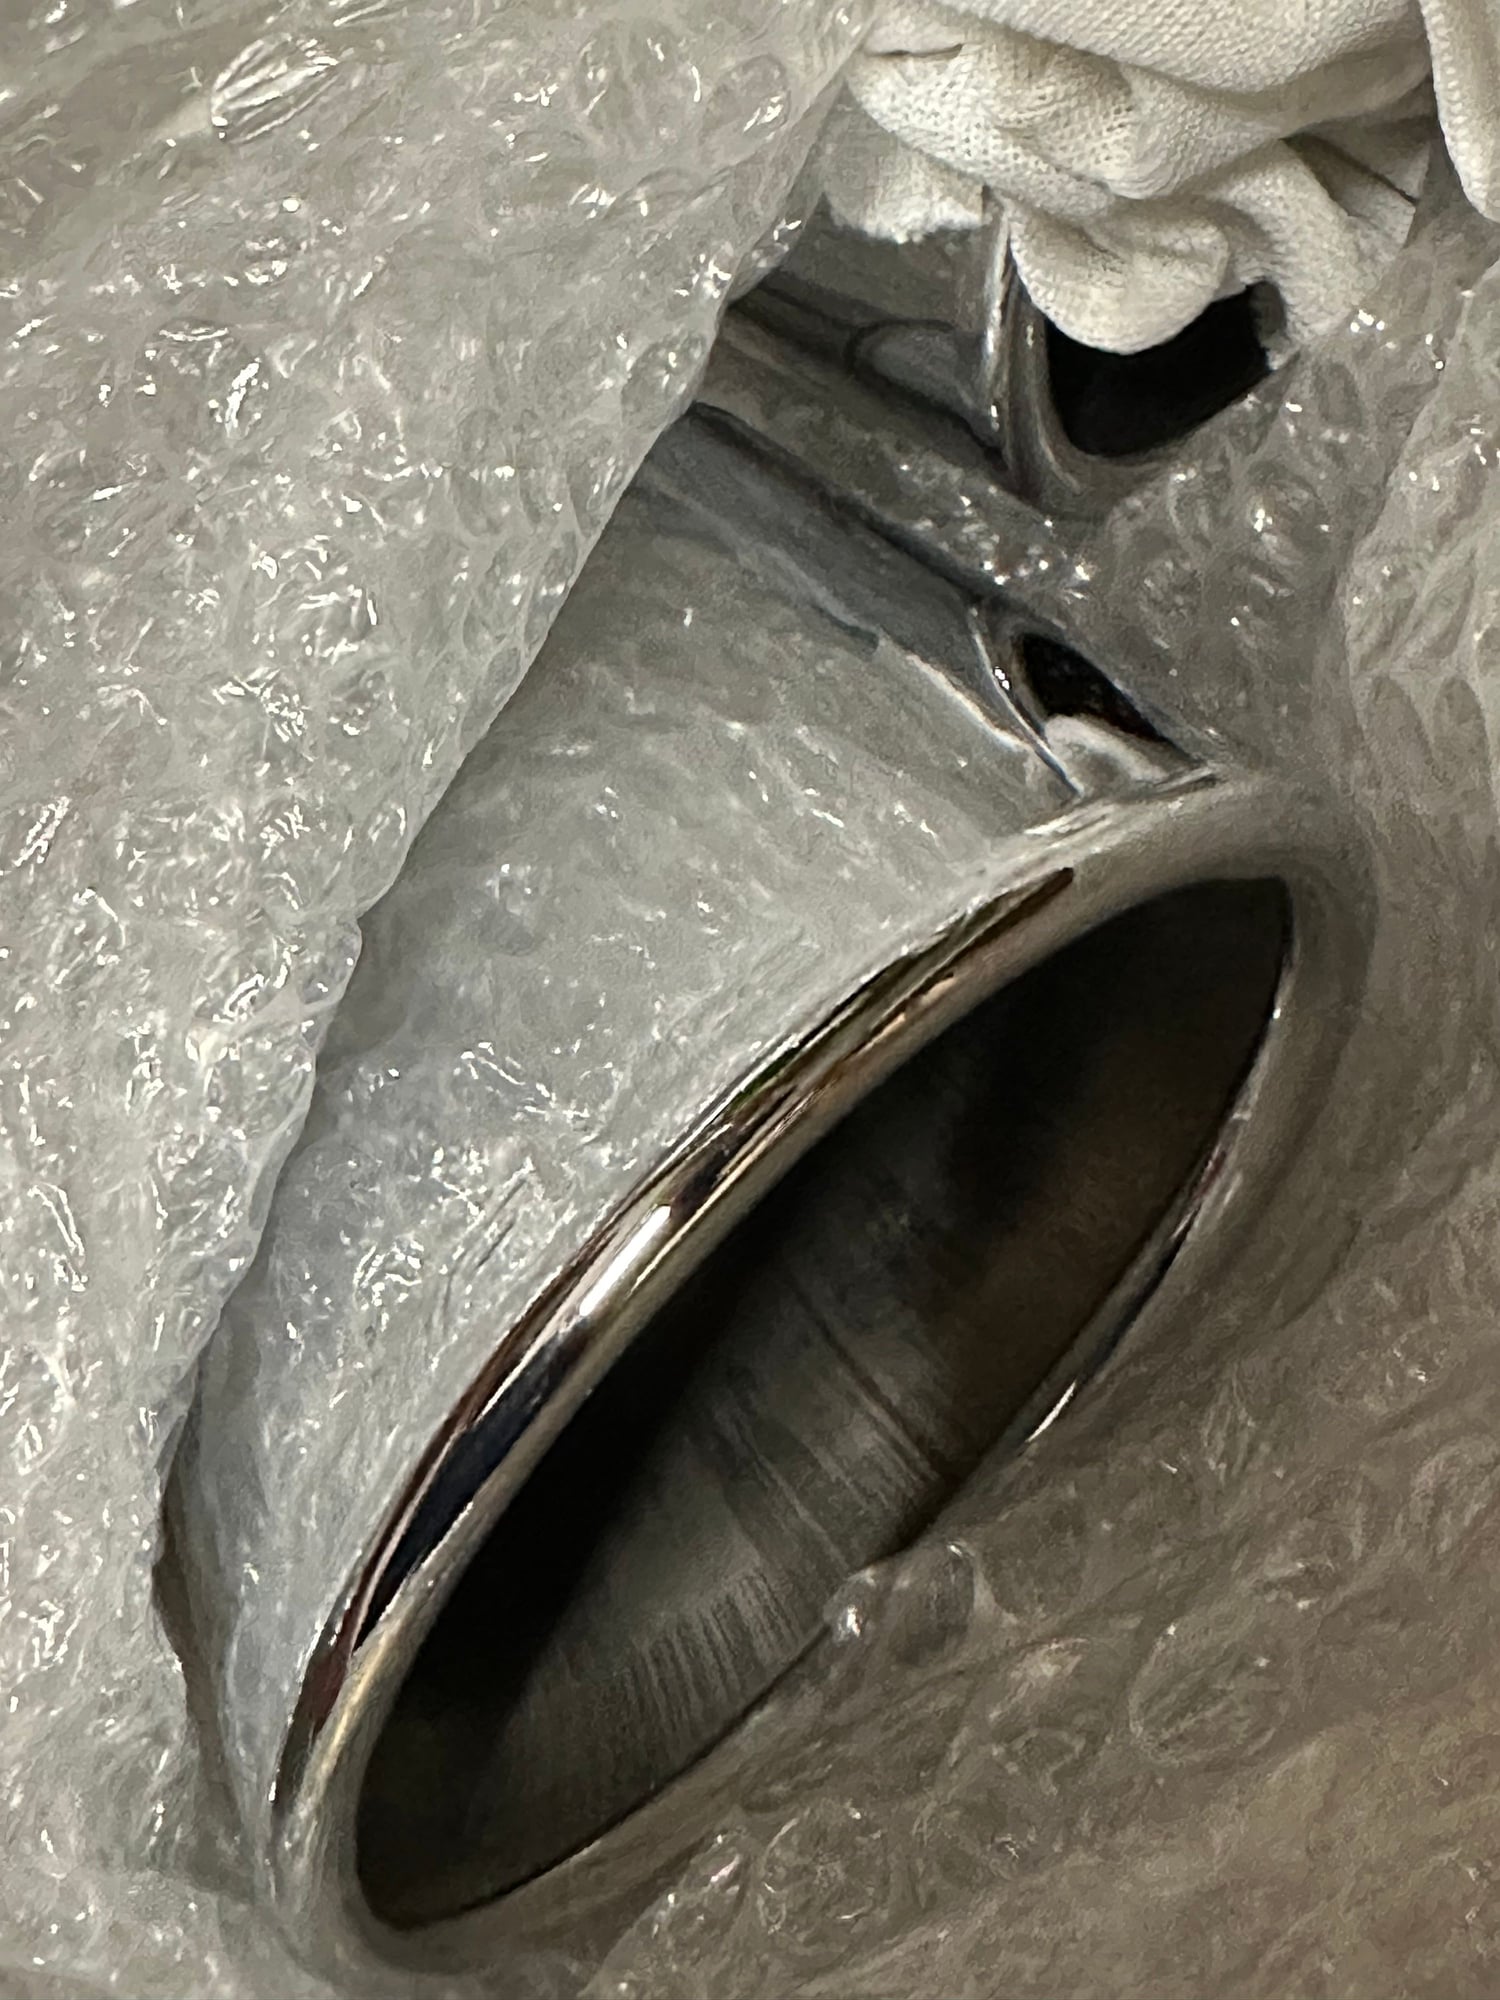 Engine - Exhaust - Like New Exhaust for 2019+ G550 or 2019+ G63 (W464 W463a) - Factory Mufflers and Tips - Used - 2019 to 2024 Mercedes-Benz G550 - 2019 to 2024 Mercedes-Benz G63 AMG - Peoria, IL 61615, United States